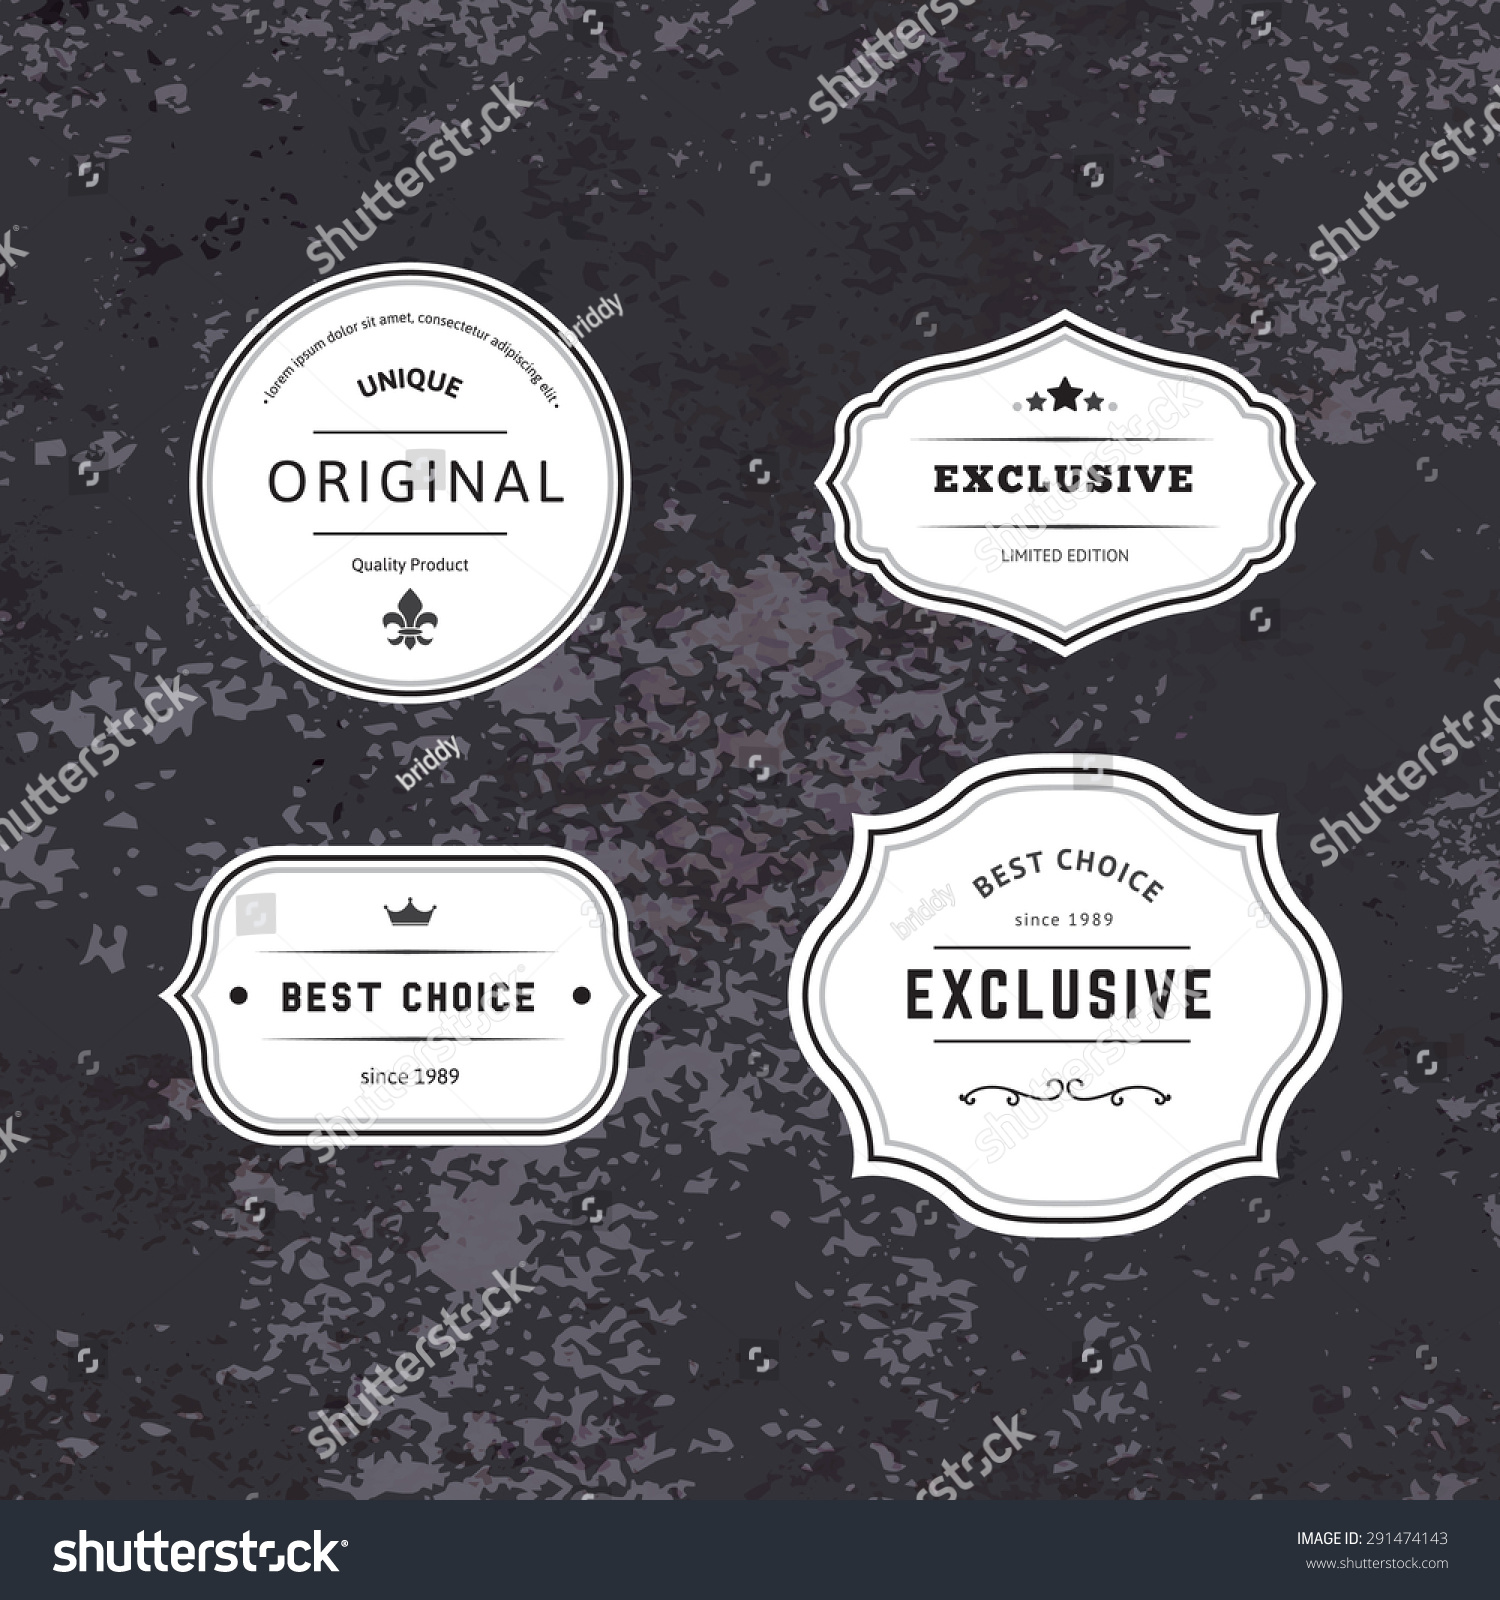 Set of Hipster Labels with Frames. Authentic Retro Vector Tags Design. Minimalistic Craft Beer Badges. #291474143